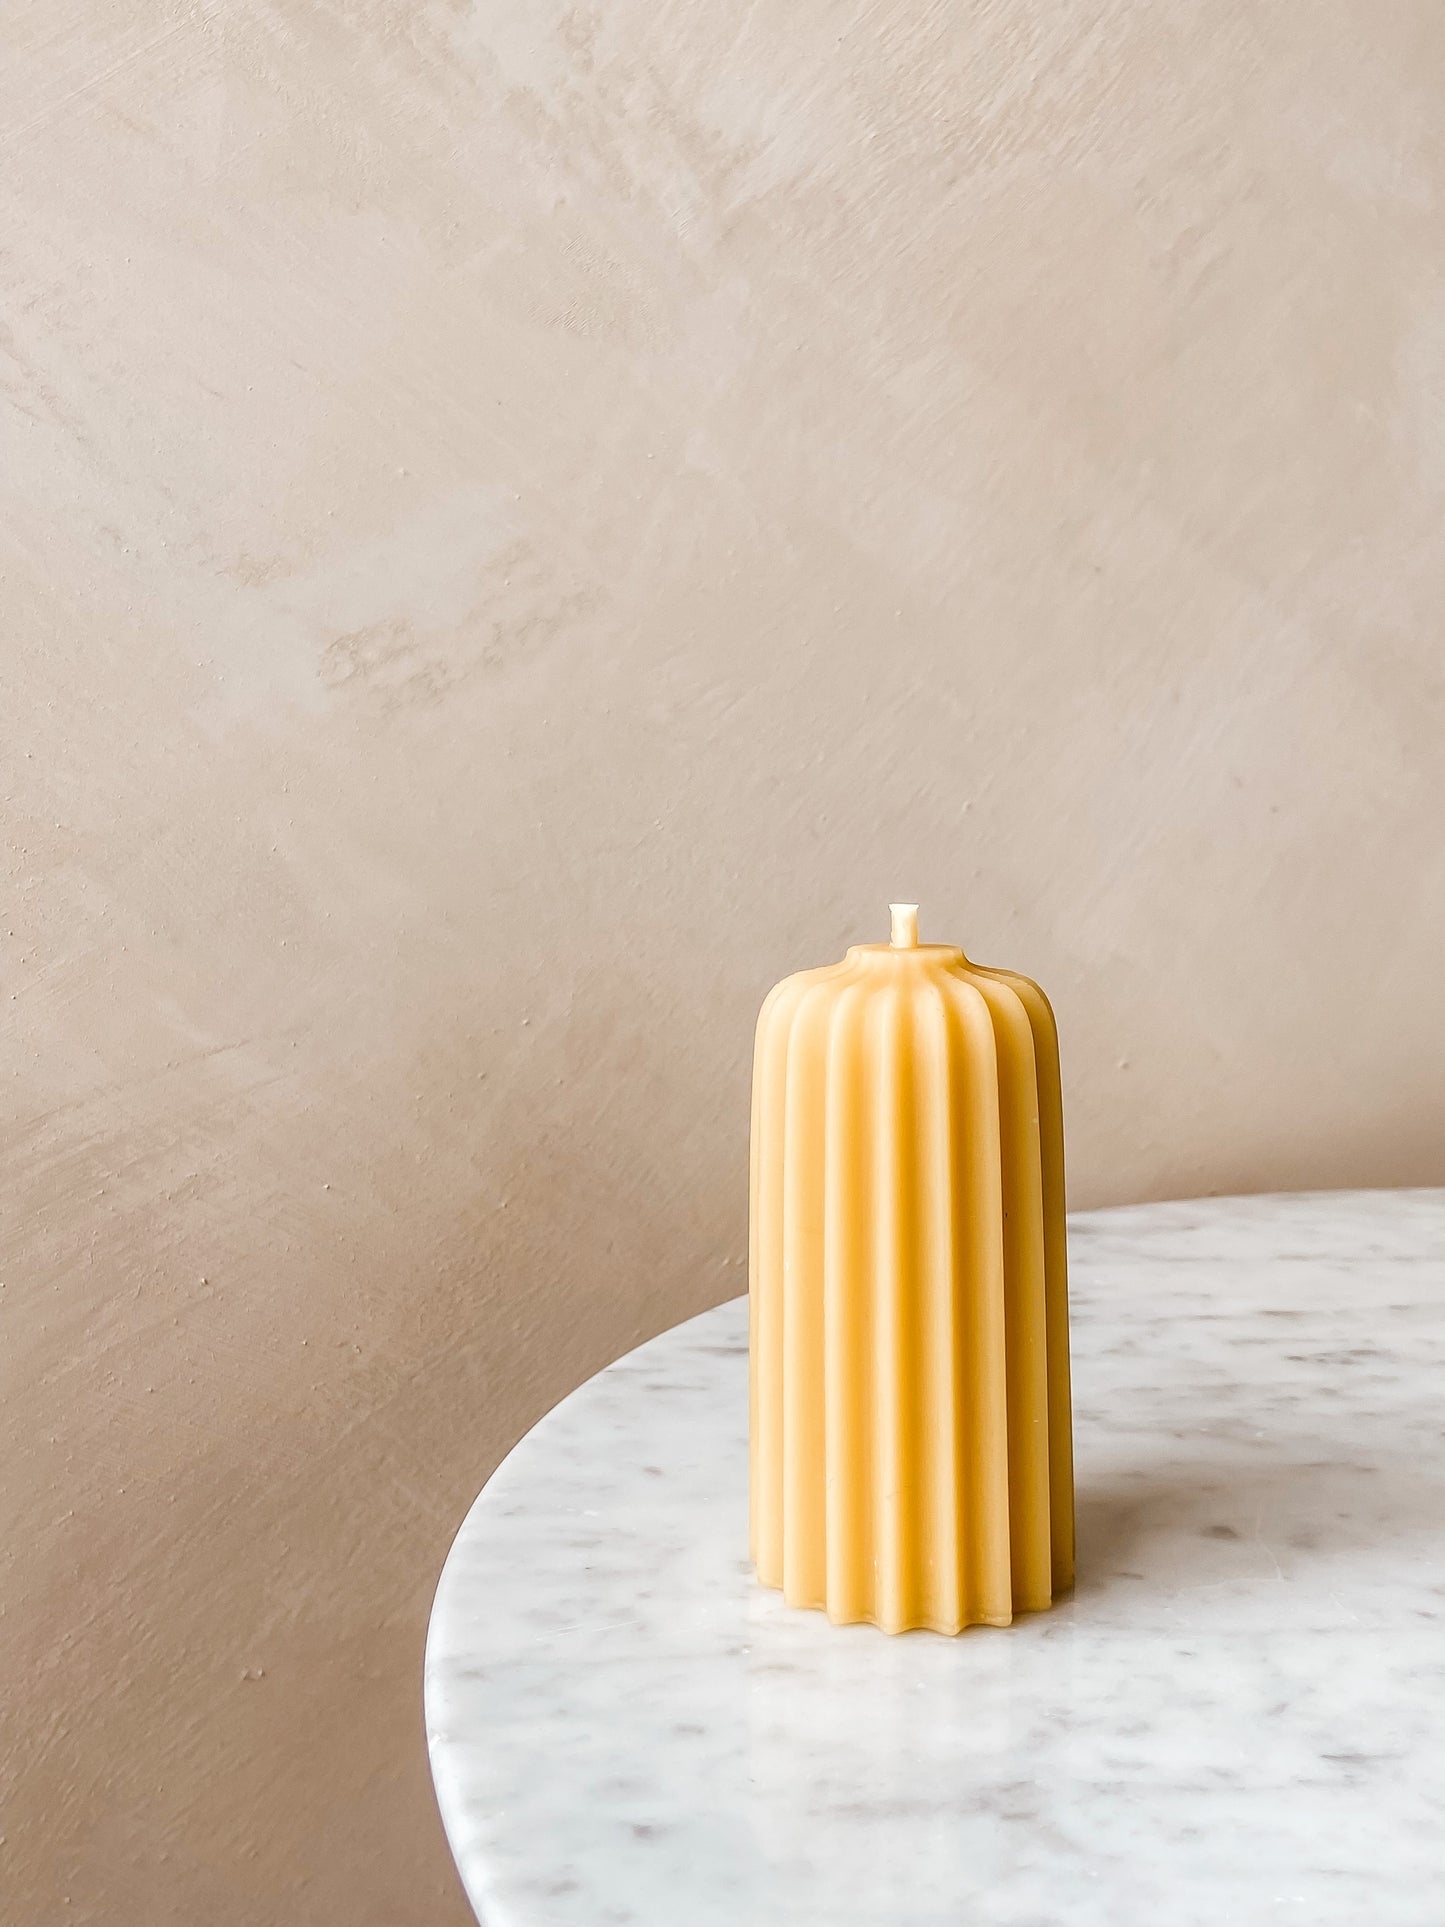 Pleated Pillar Candle designed by Tony Assness